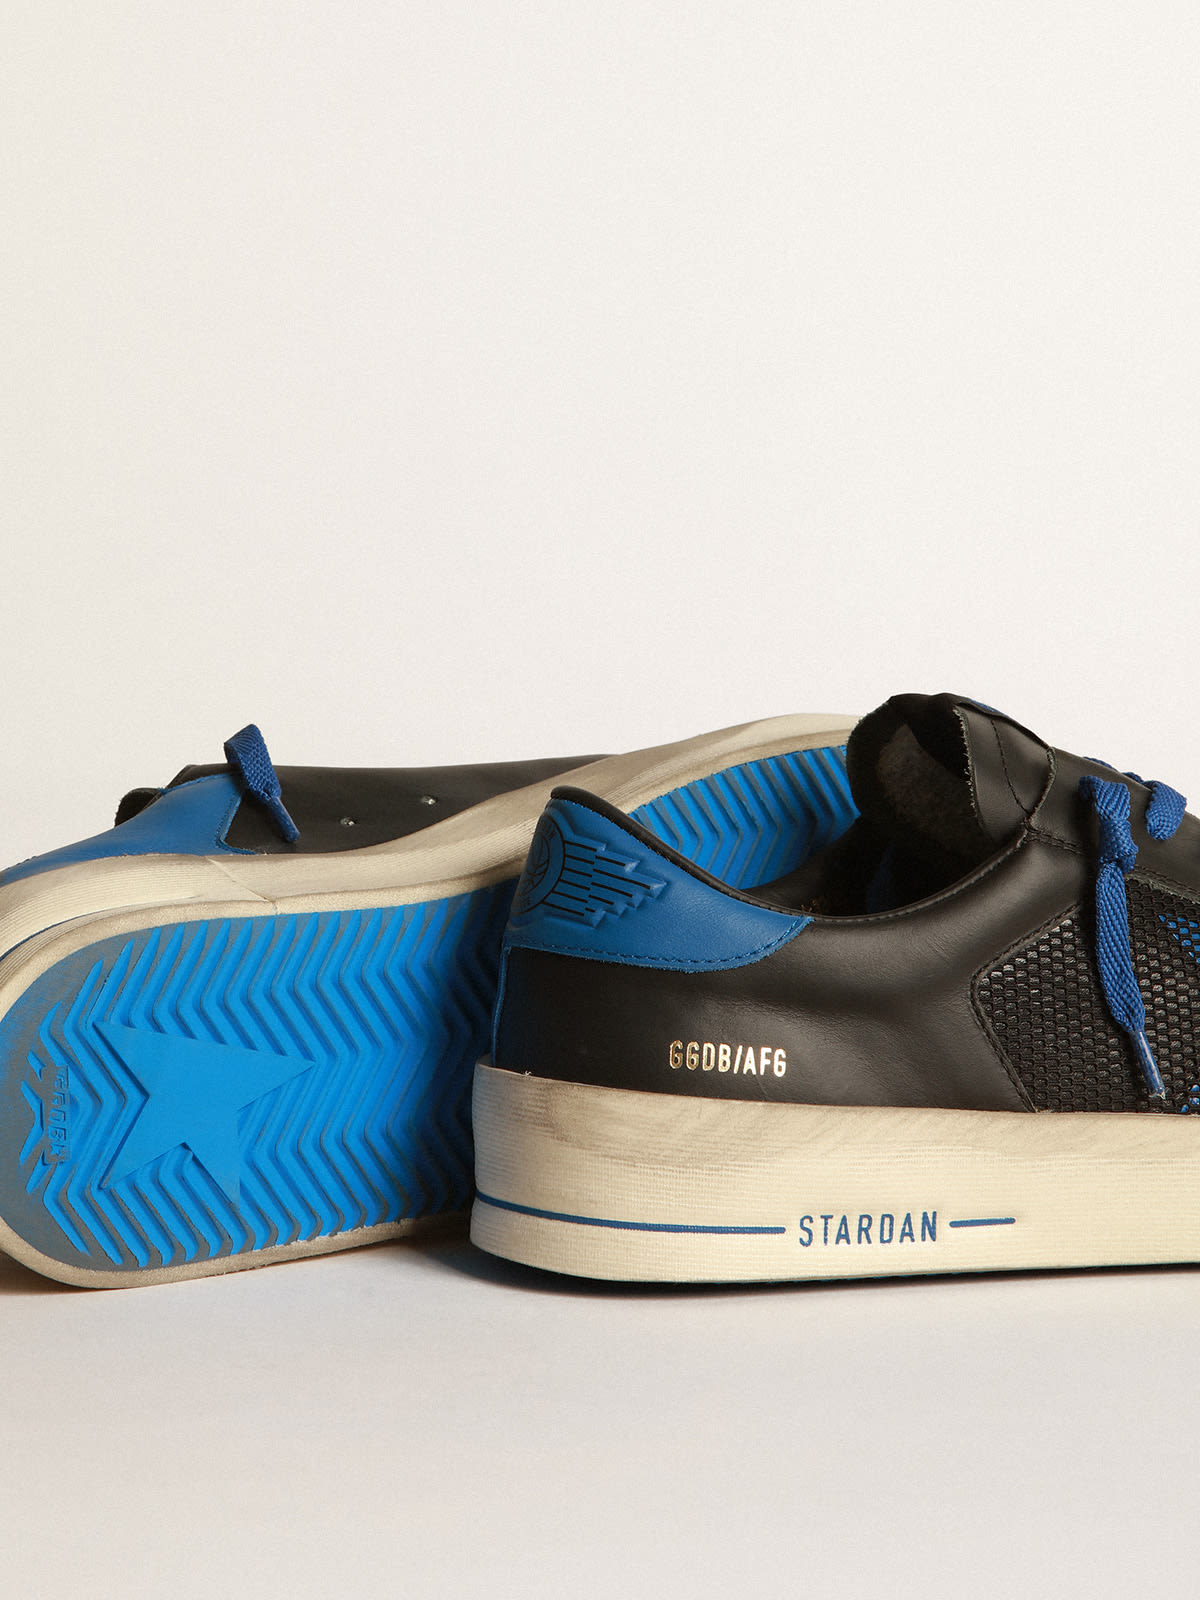 Golden Goose - Stardan sneakers in black and light blue leather with black mesh inserts and a light blue leather star    in 